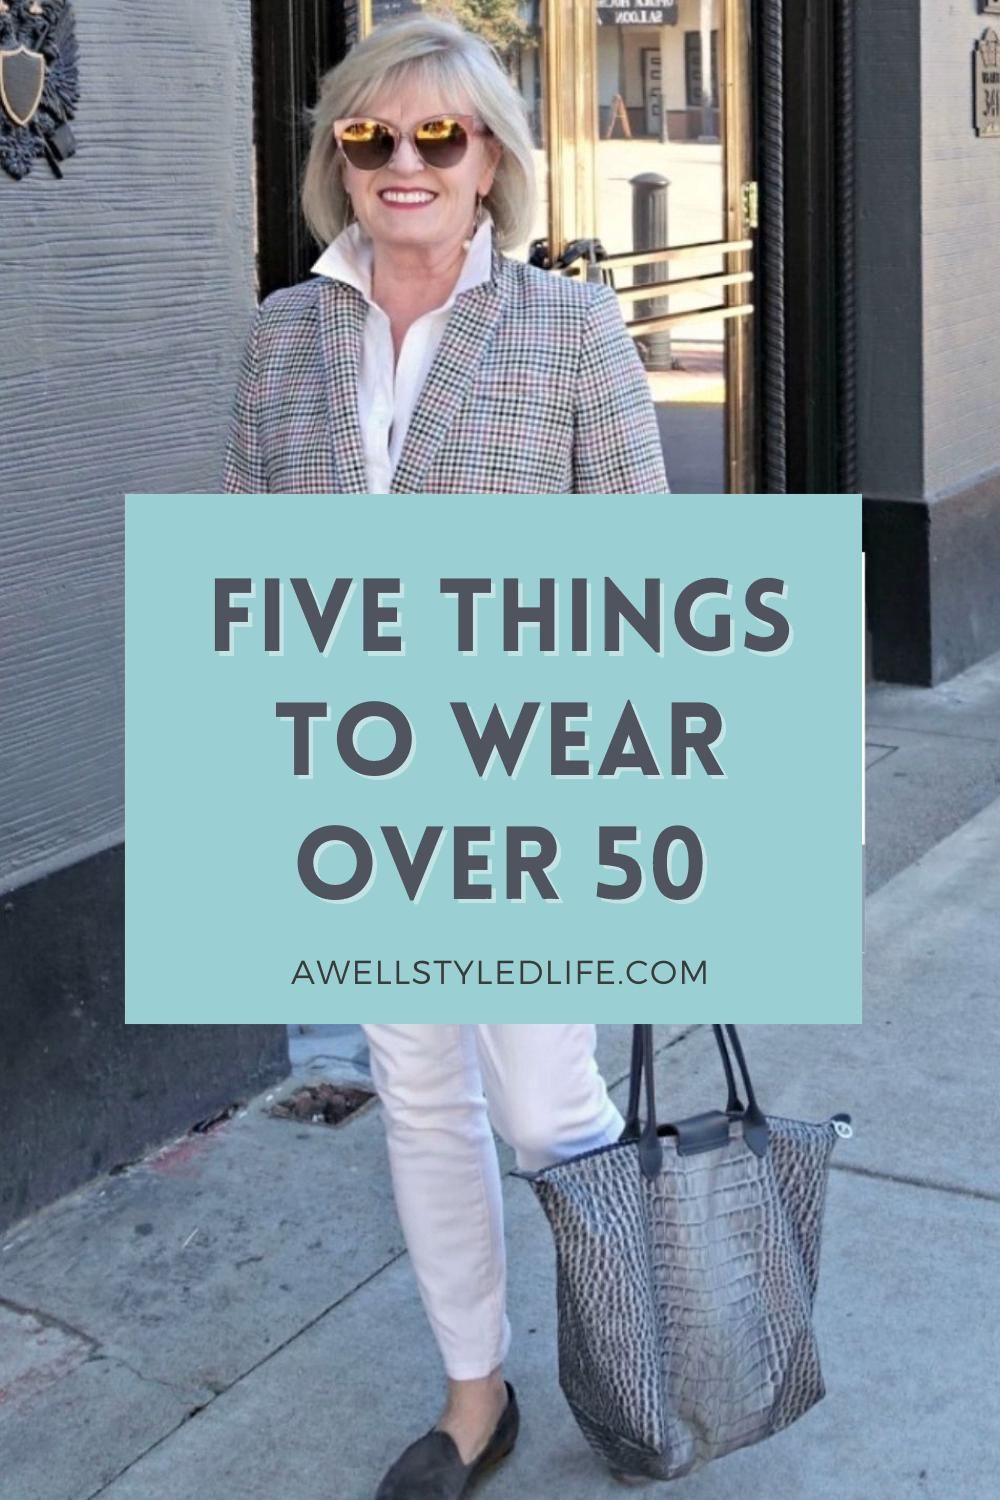 Five Things to Wear Over 50